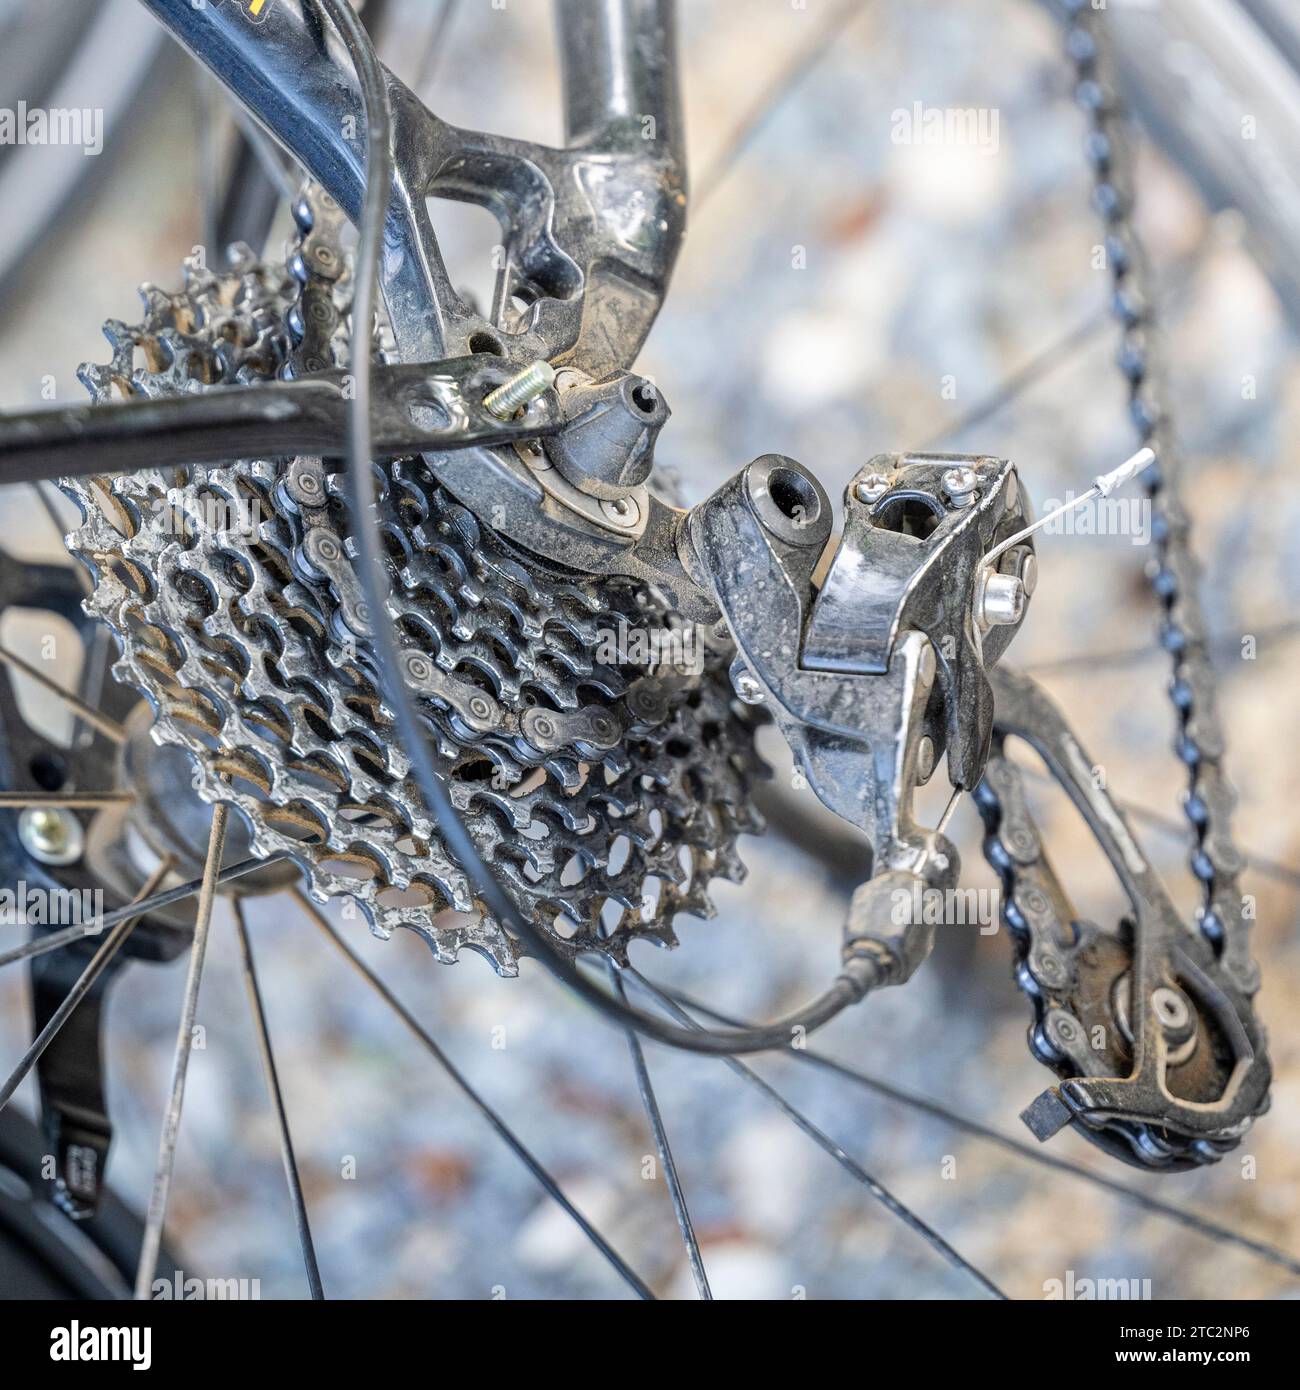 Rear bicycle cog wheels gears, chain and wheel Stock Photo